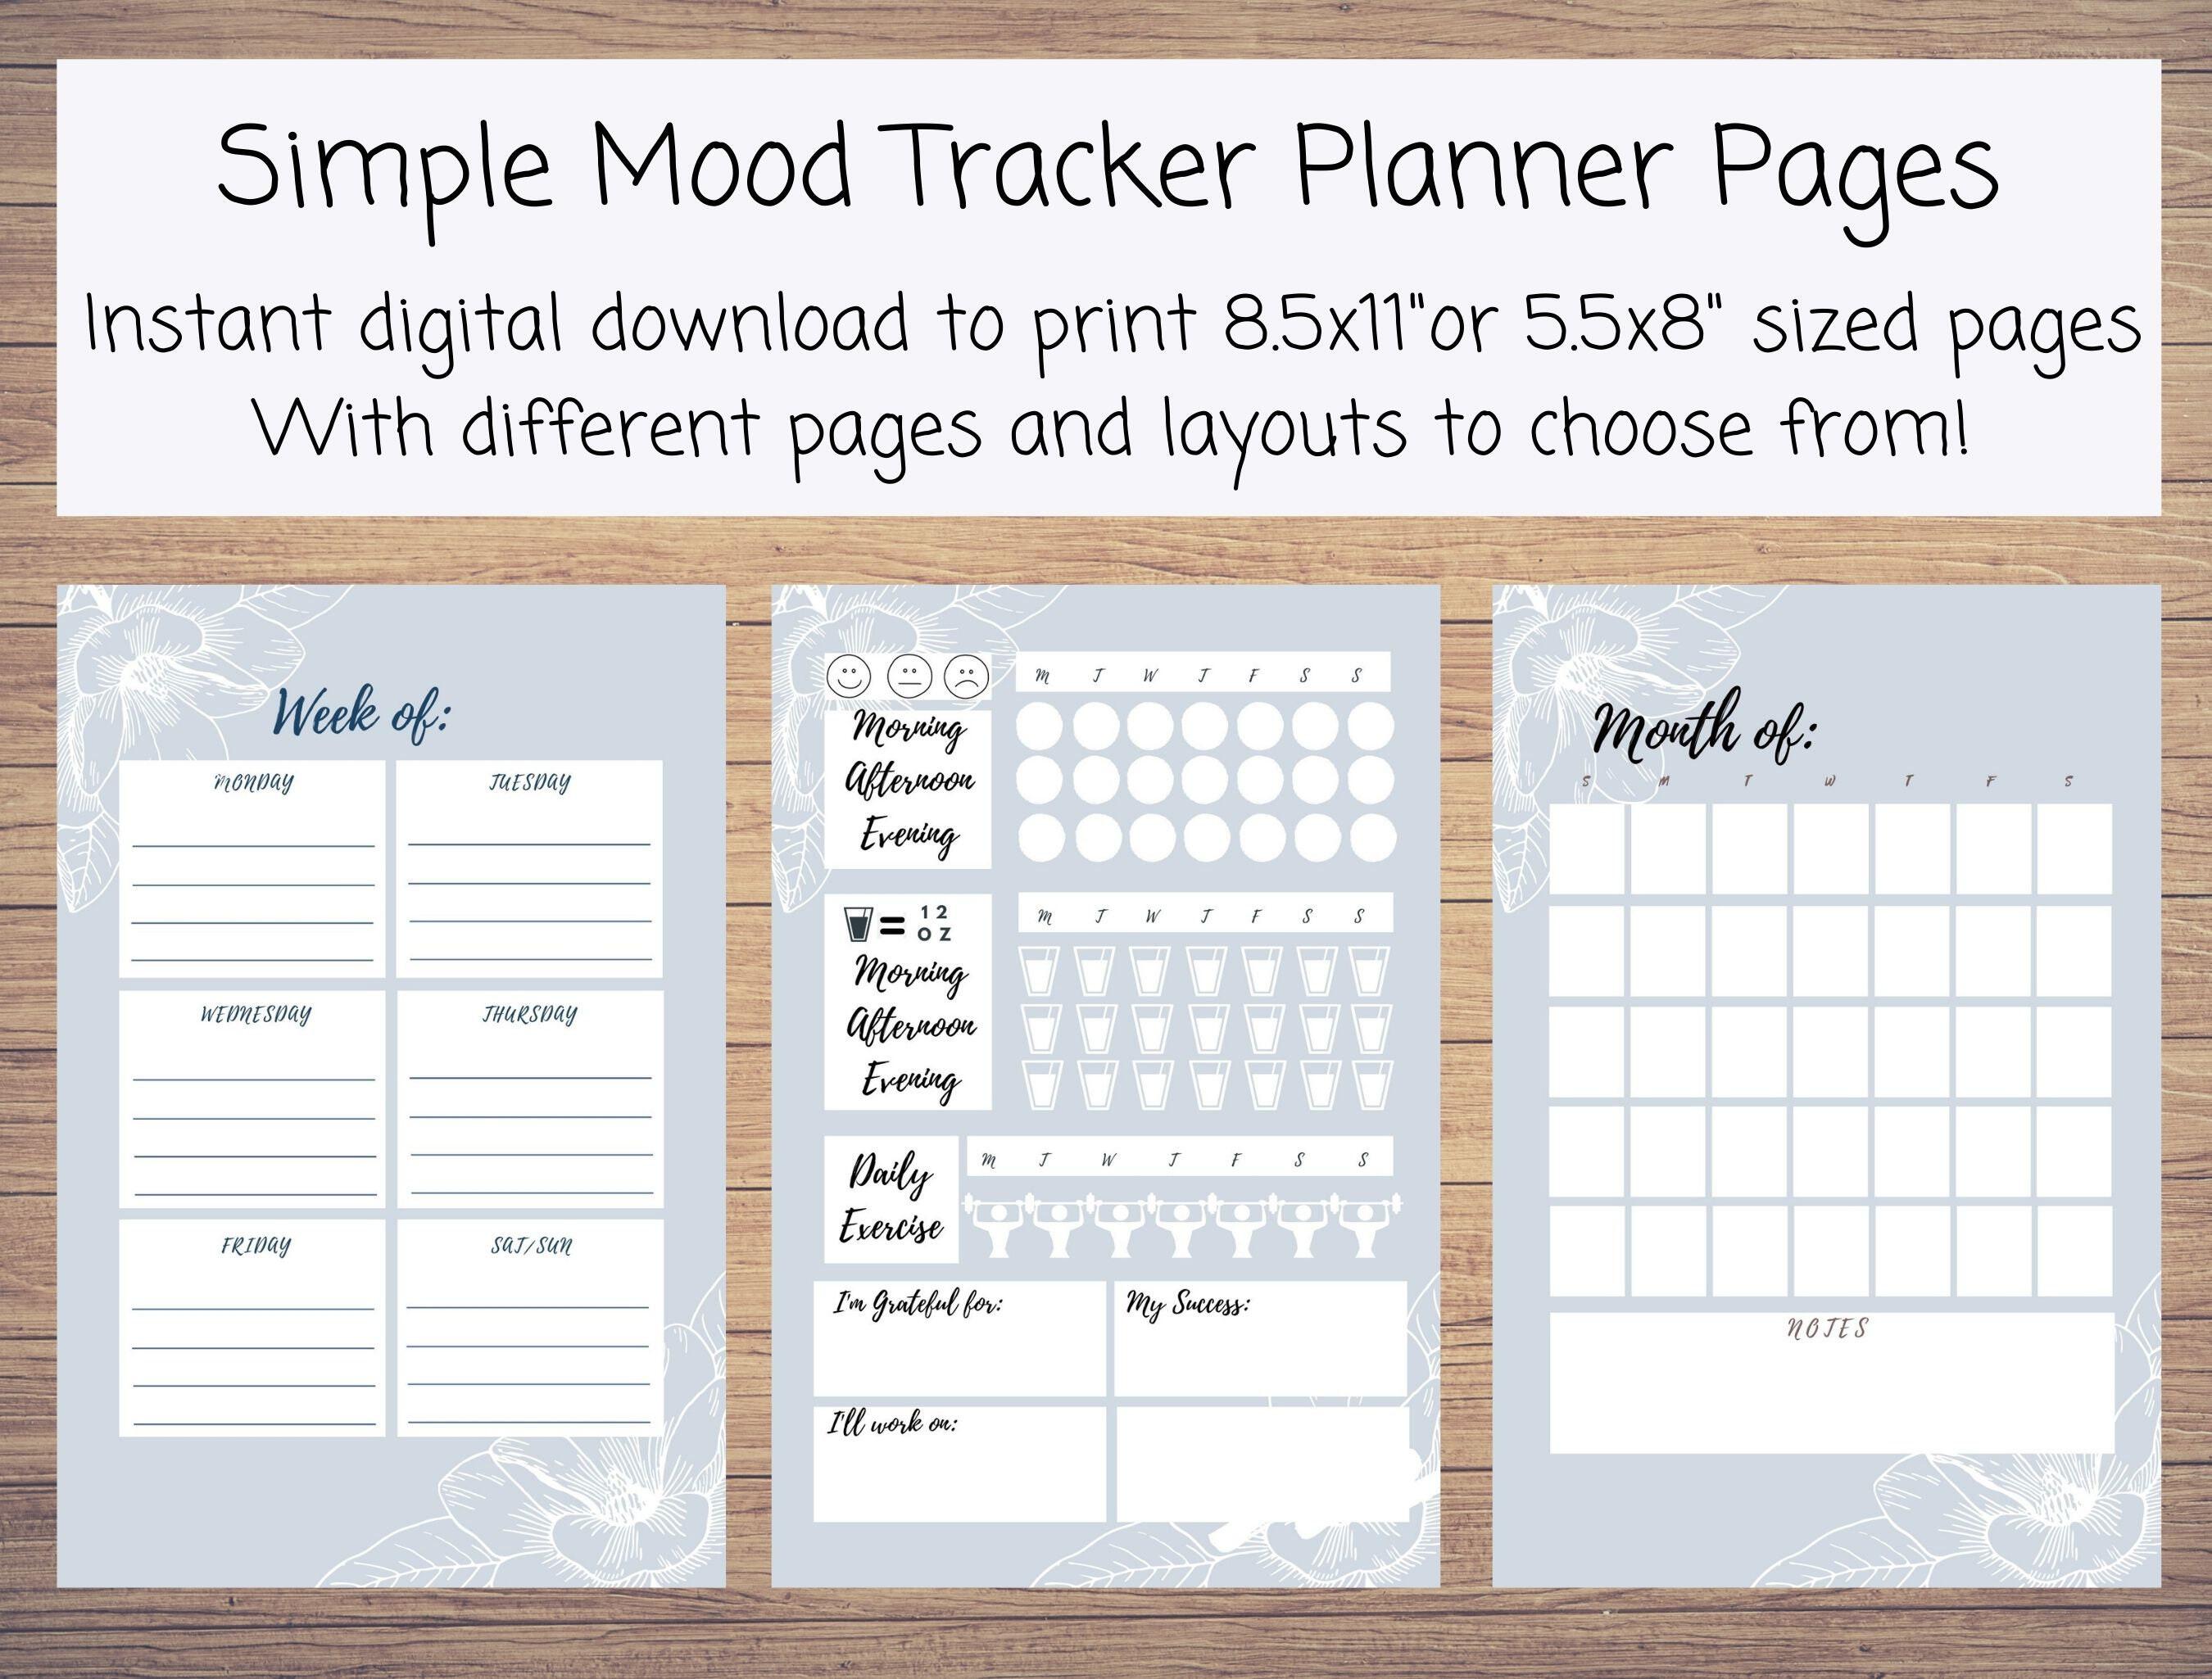 FREE Printable Pre-made Bullet Journal Instant Download